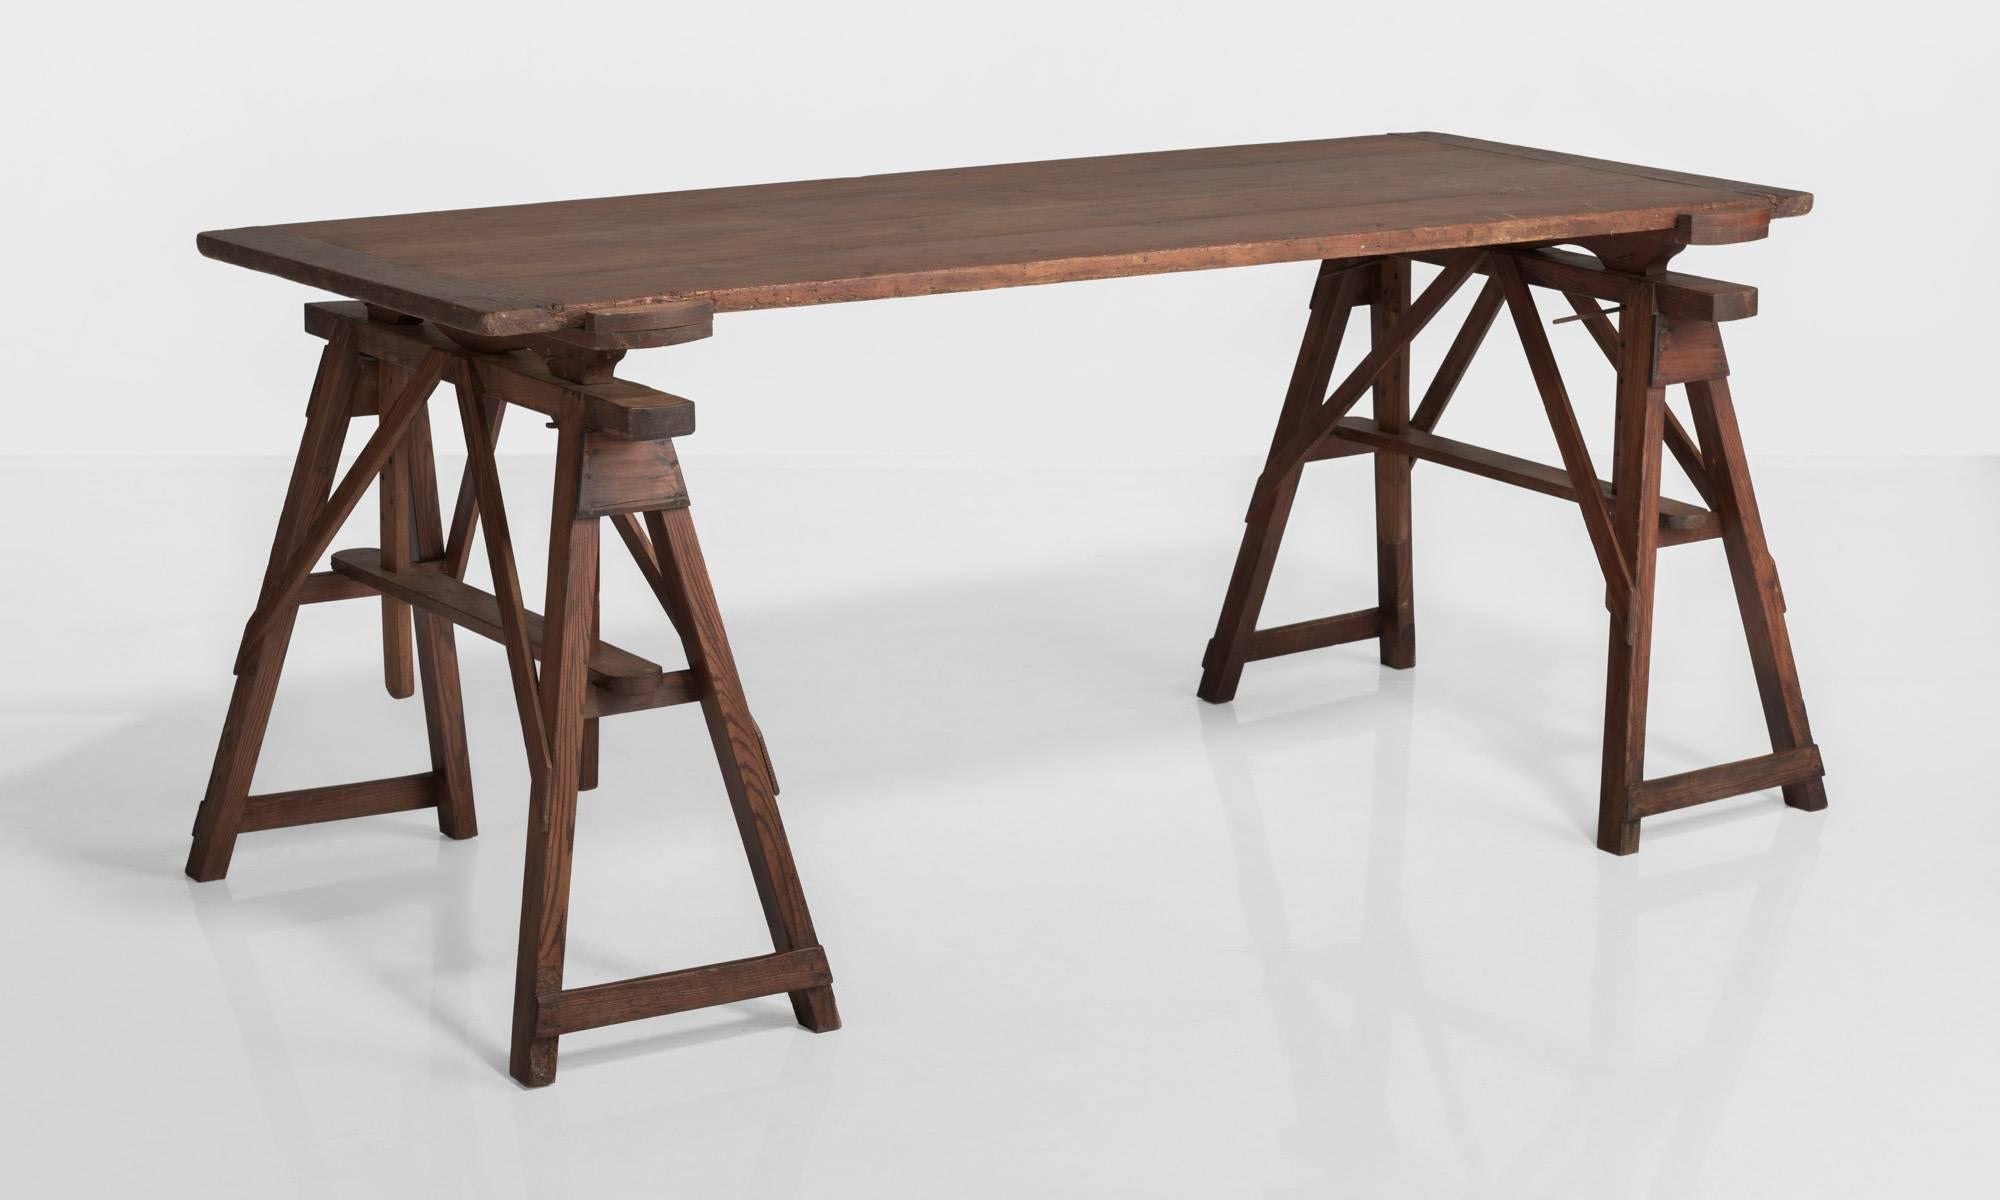 Architect's table, circa 1910

Four plank pine top on pine stretchers. Wonderful color and adjustable surface height.